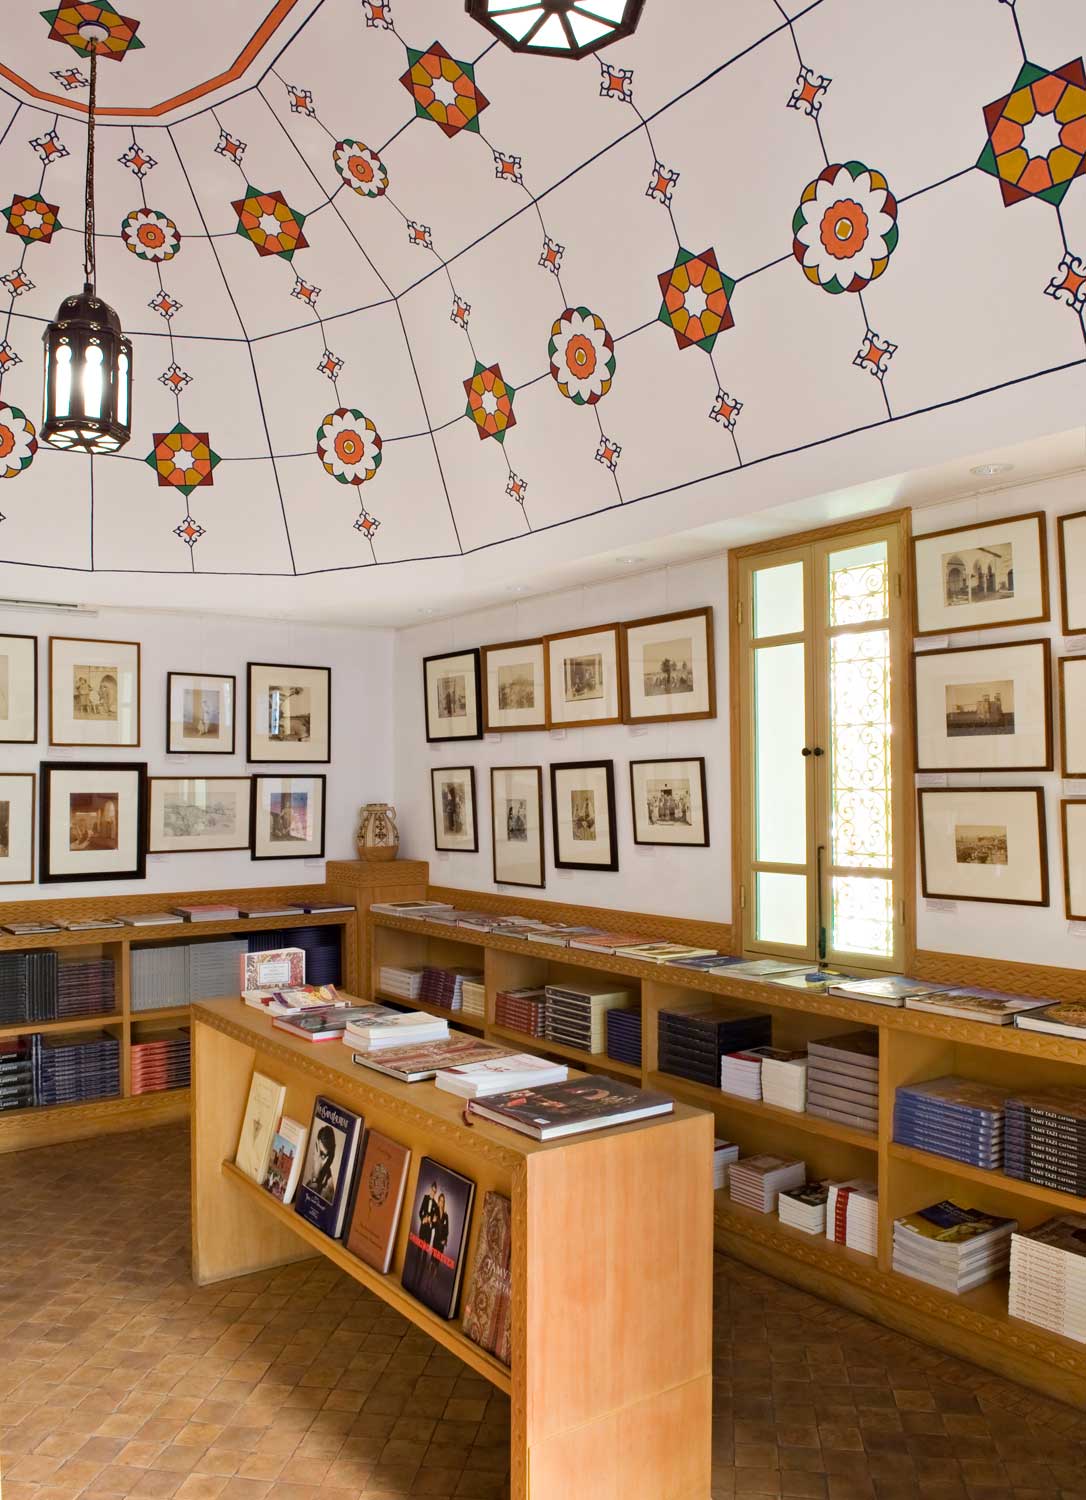 Interior view of a bookstore or library